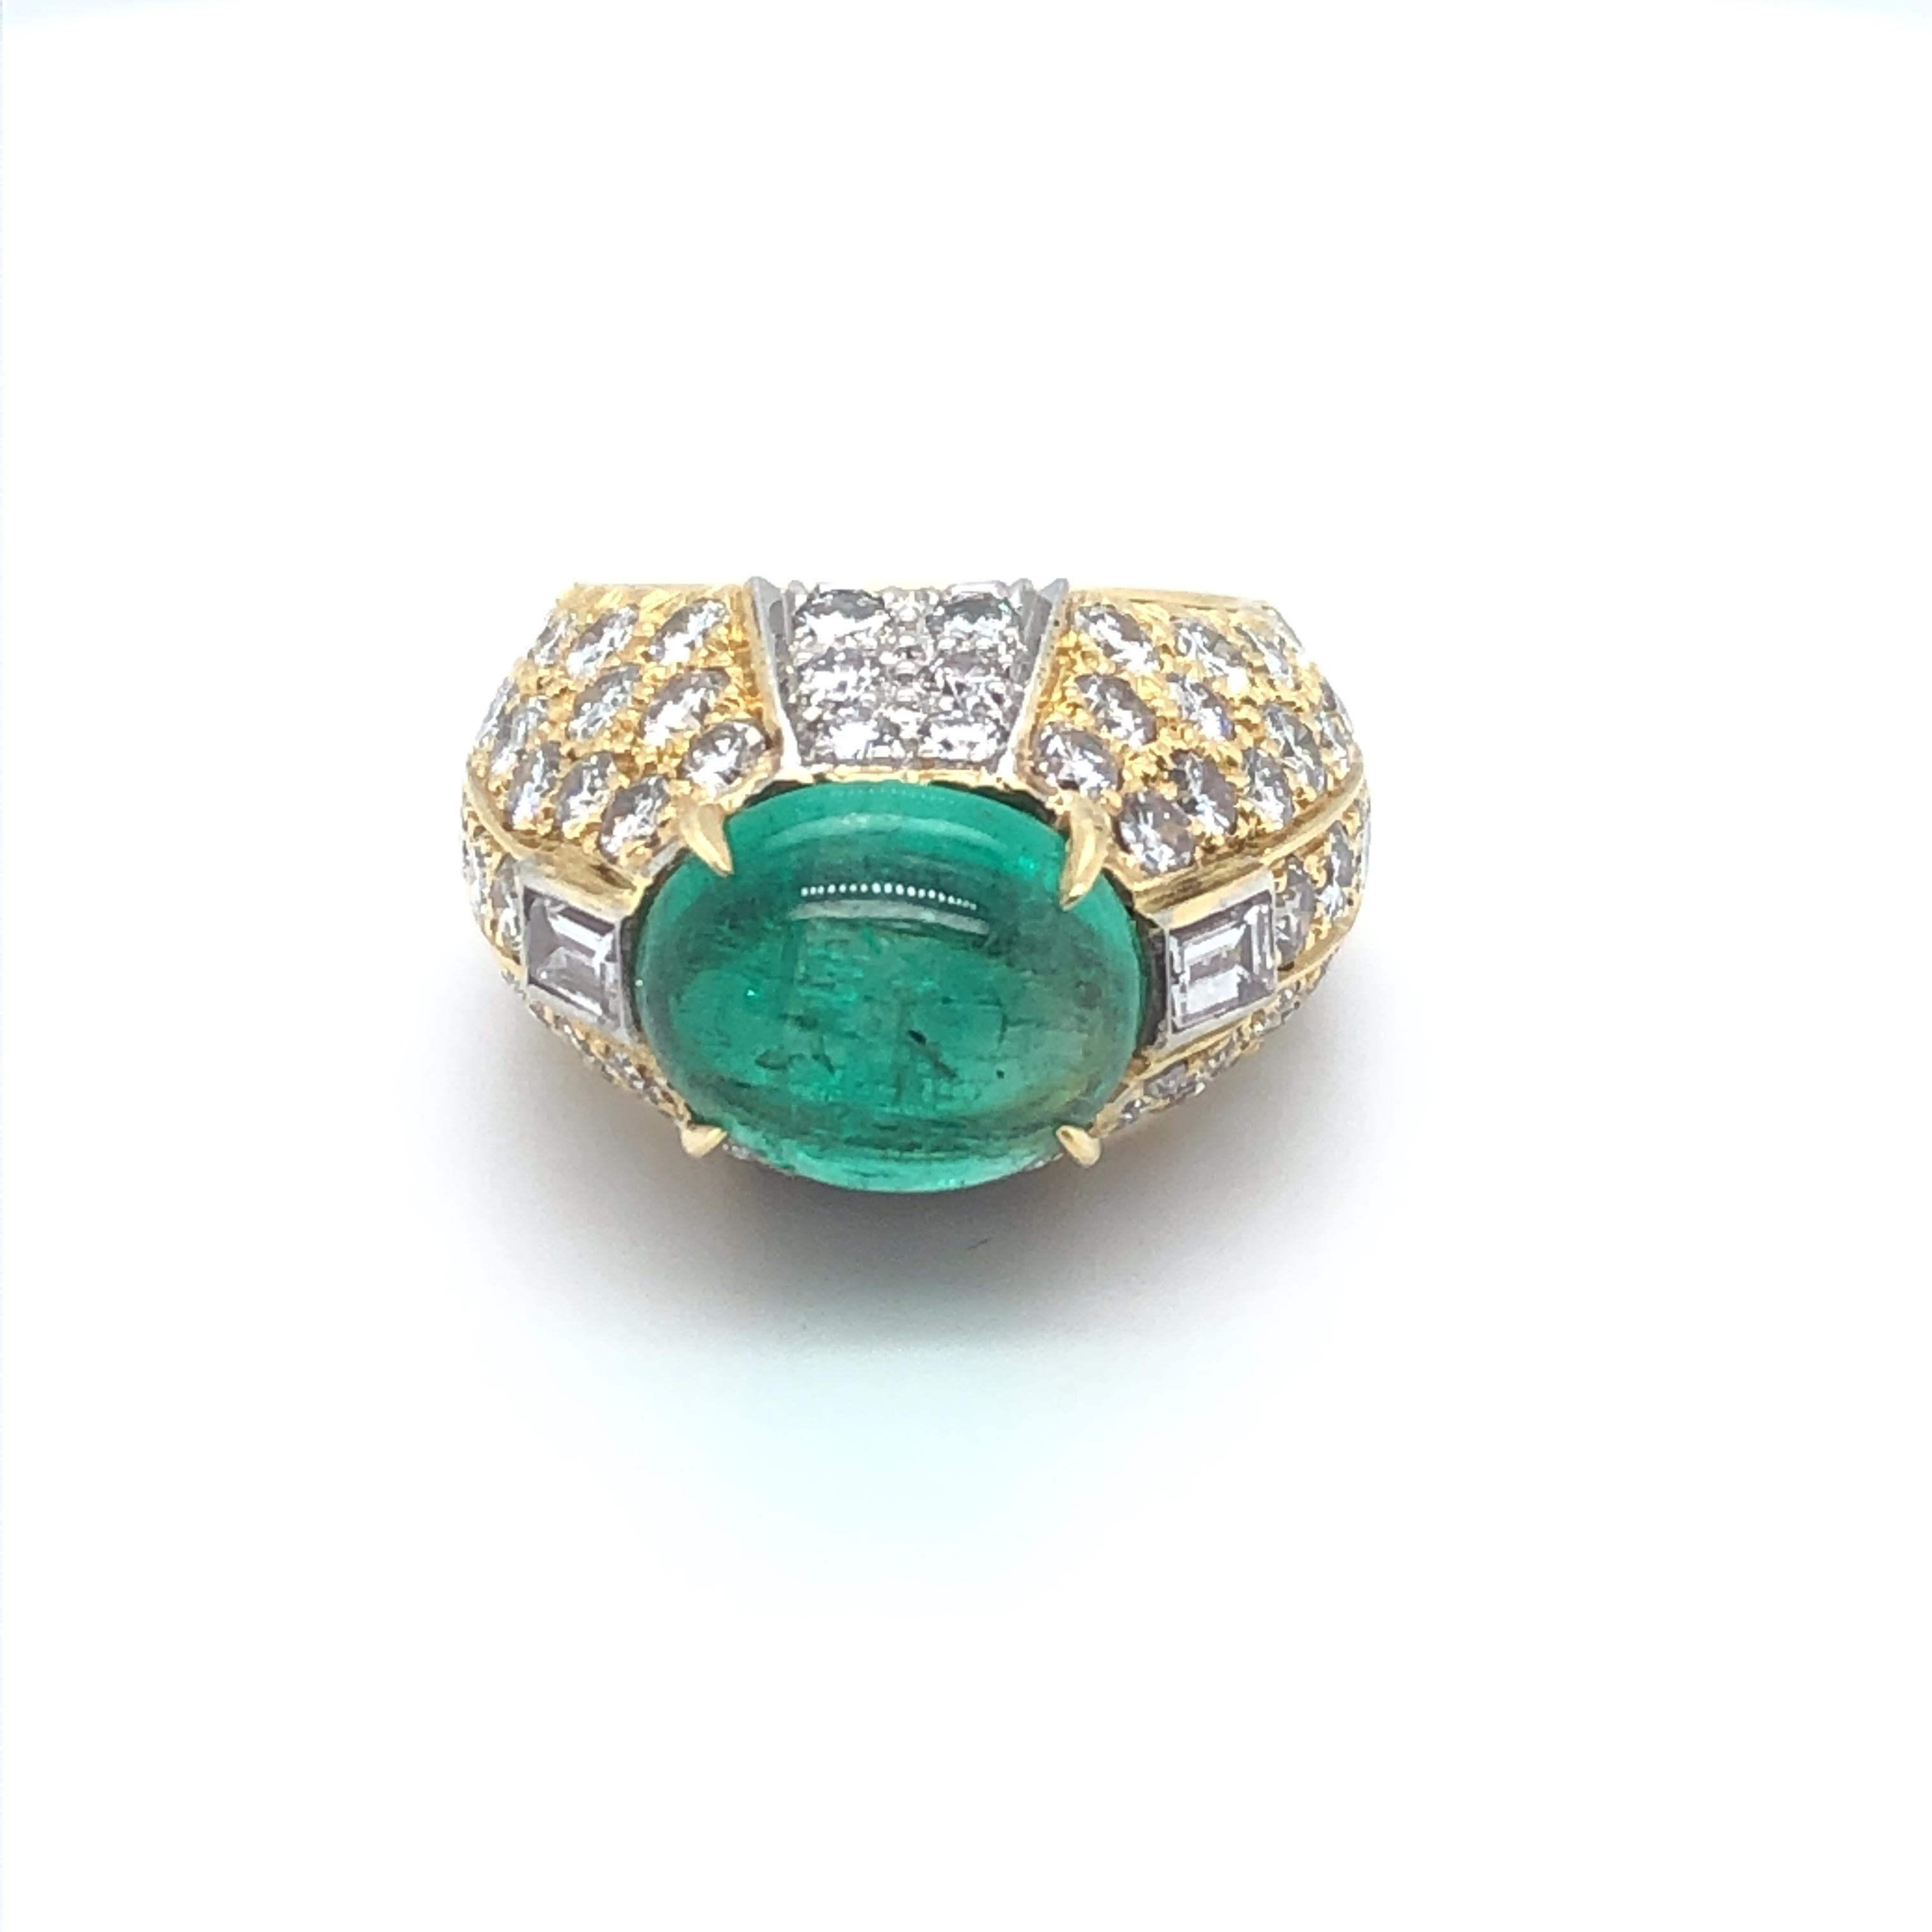 This David Webb ring features an approximately 4.5ct cabochon emerald, accentuated by an estimated 4.5cts of round brilliant (and two emerald cut) diamonds set in alternating panels of 18k yellow gold and platinum.  The external edges of the yellow